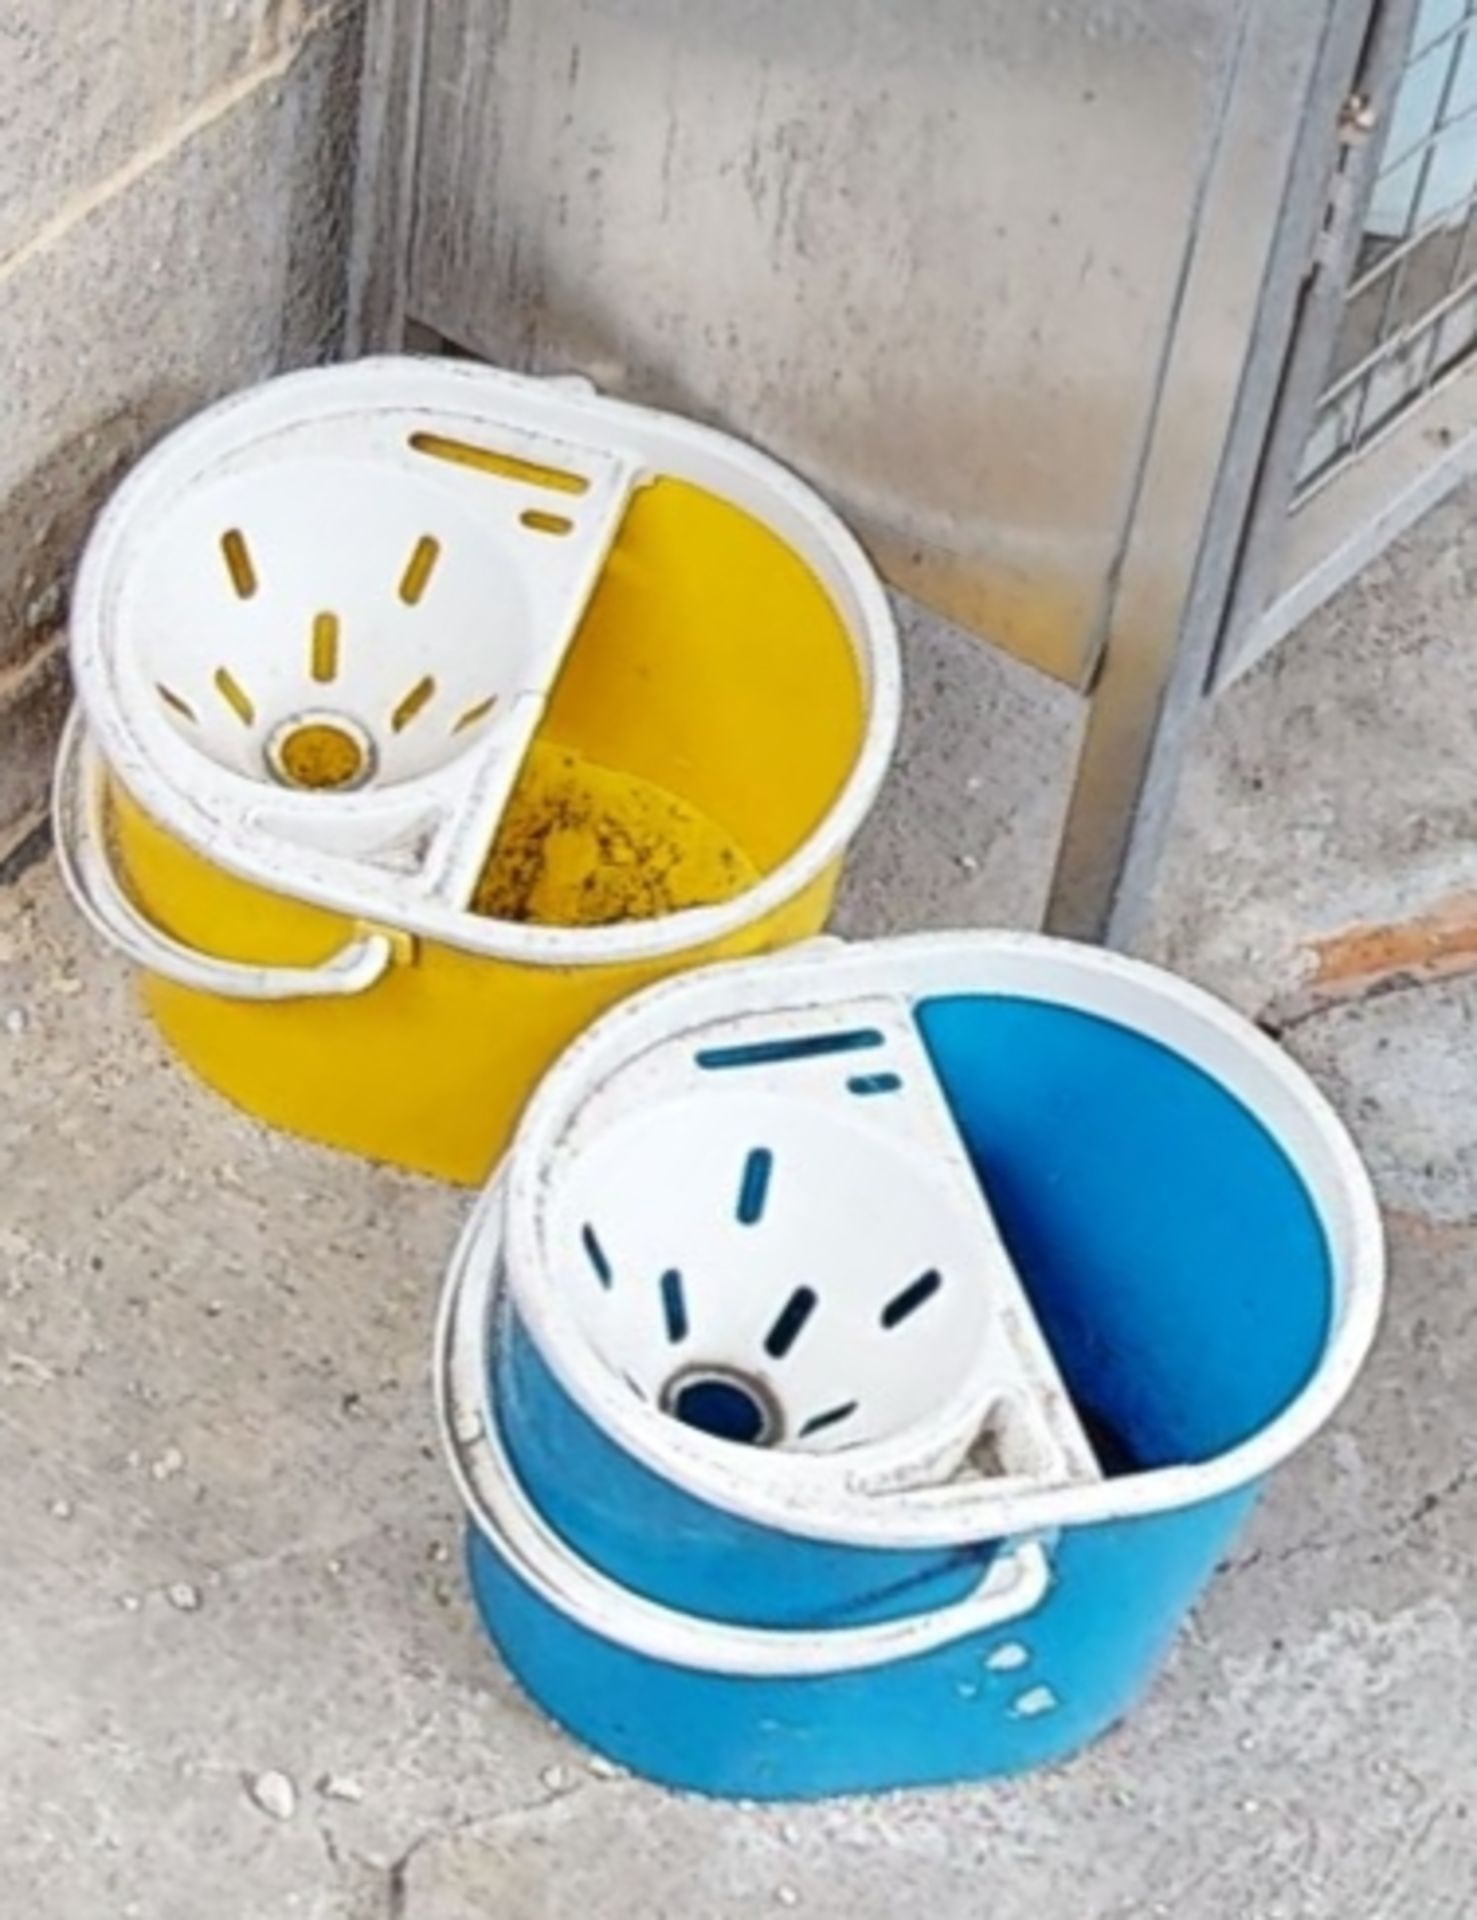 1 x Assorted Collection of Cleaning Products - Mop Buckets, Wet Floor Signs, Wet Brush, Mop Handles - Image 2 of 9